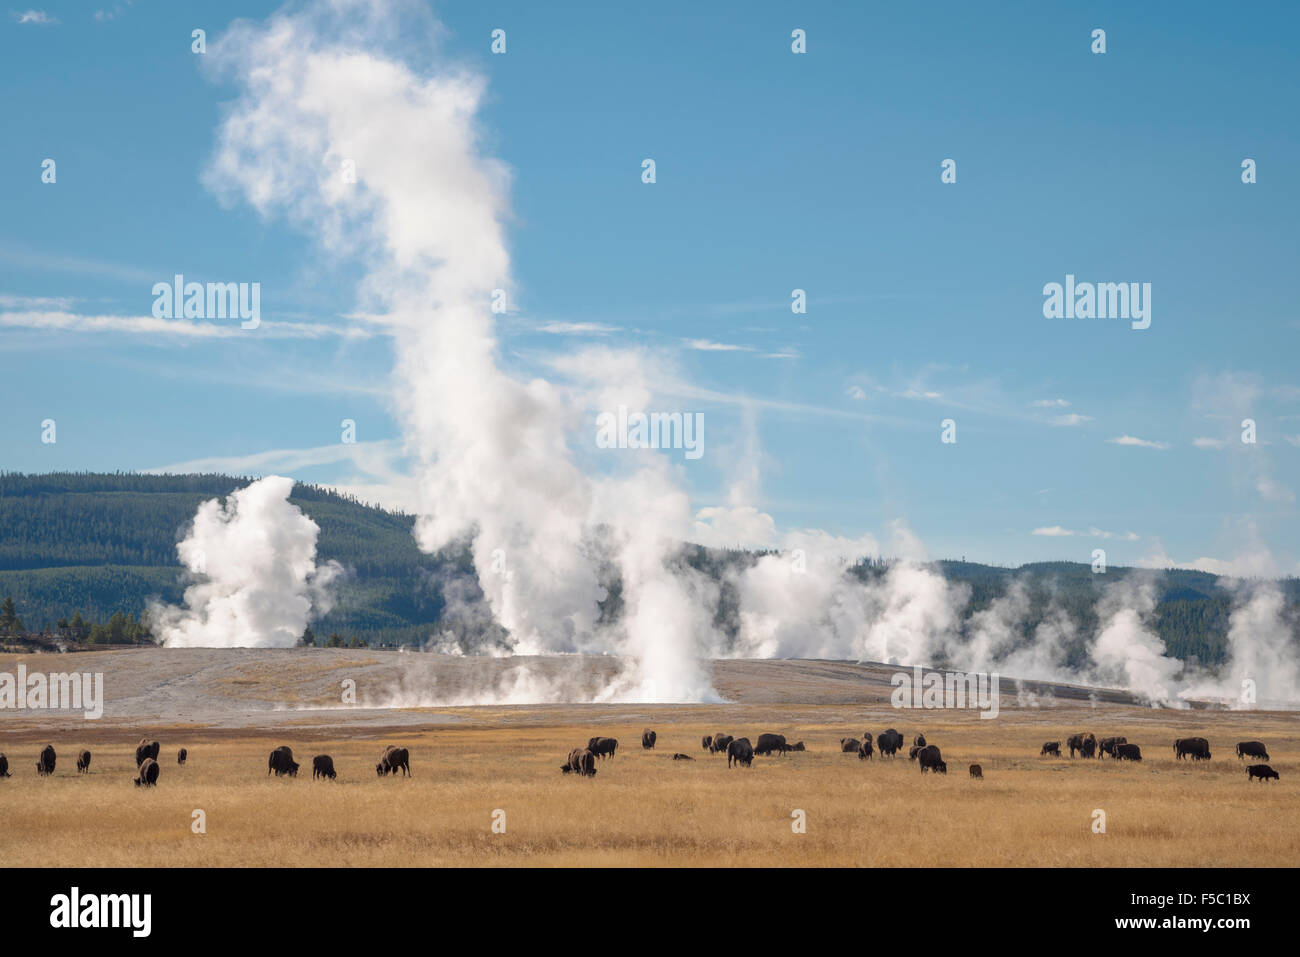 Bison and steam from geysers at Lower Geyser Basin, Yellowstone National Park, Wyoming. Stock Photo